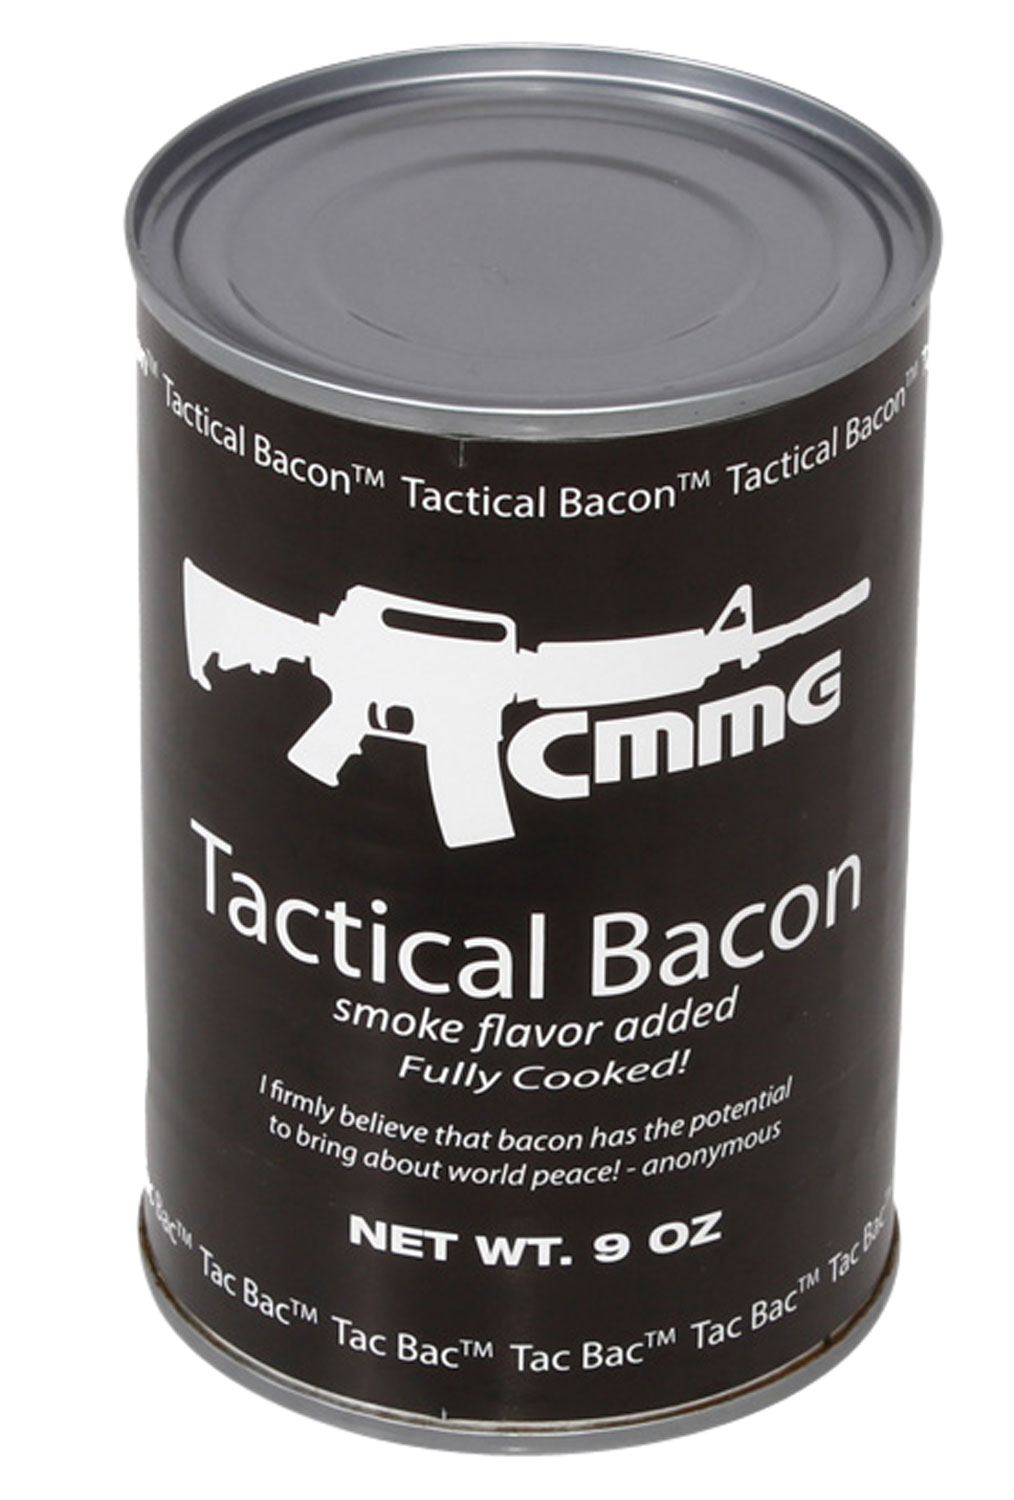 CMMG TACTICAL BACON 9 0Z. COOKED